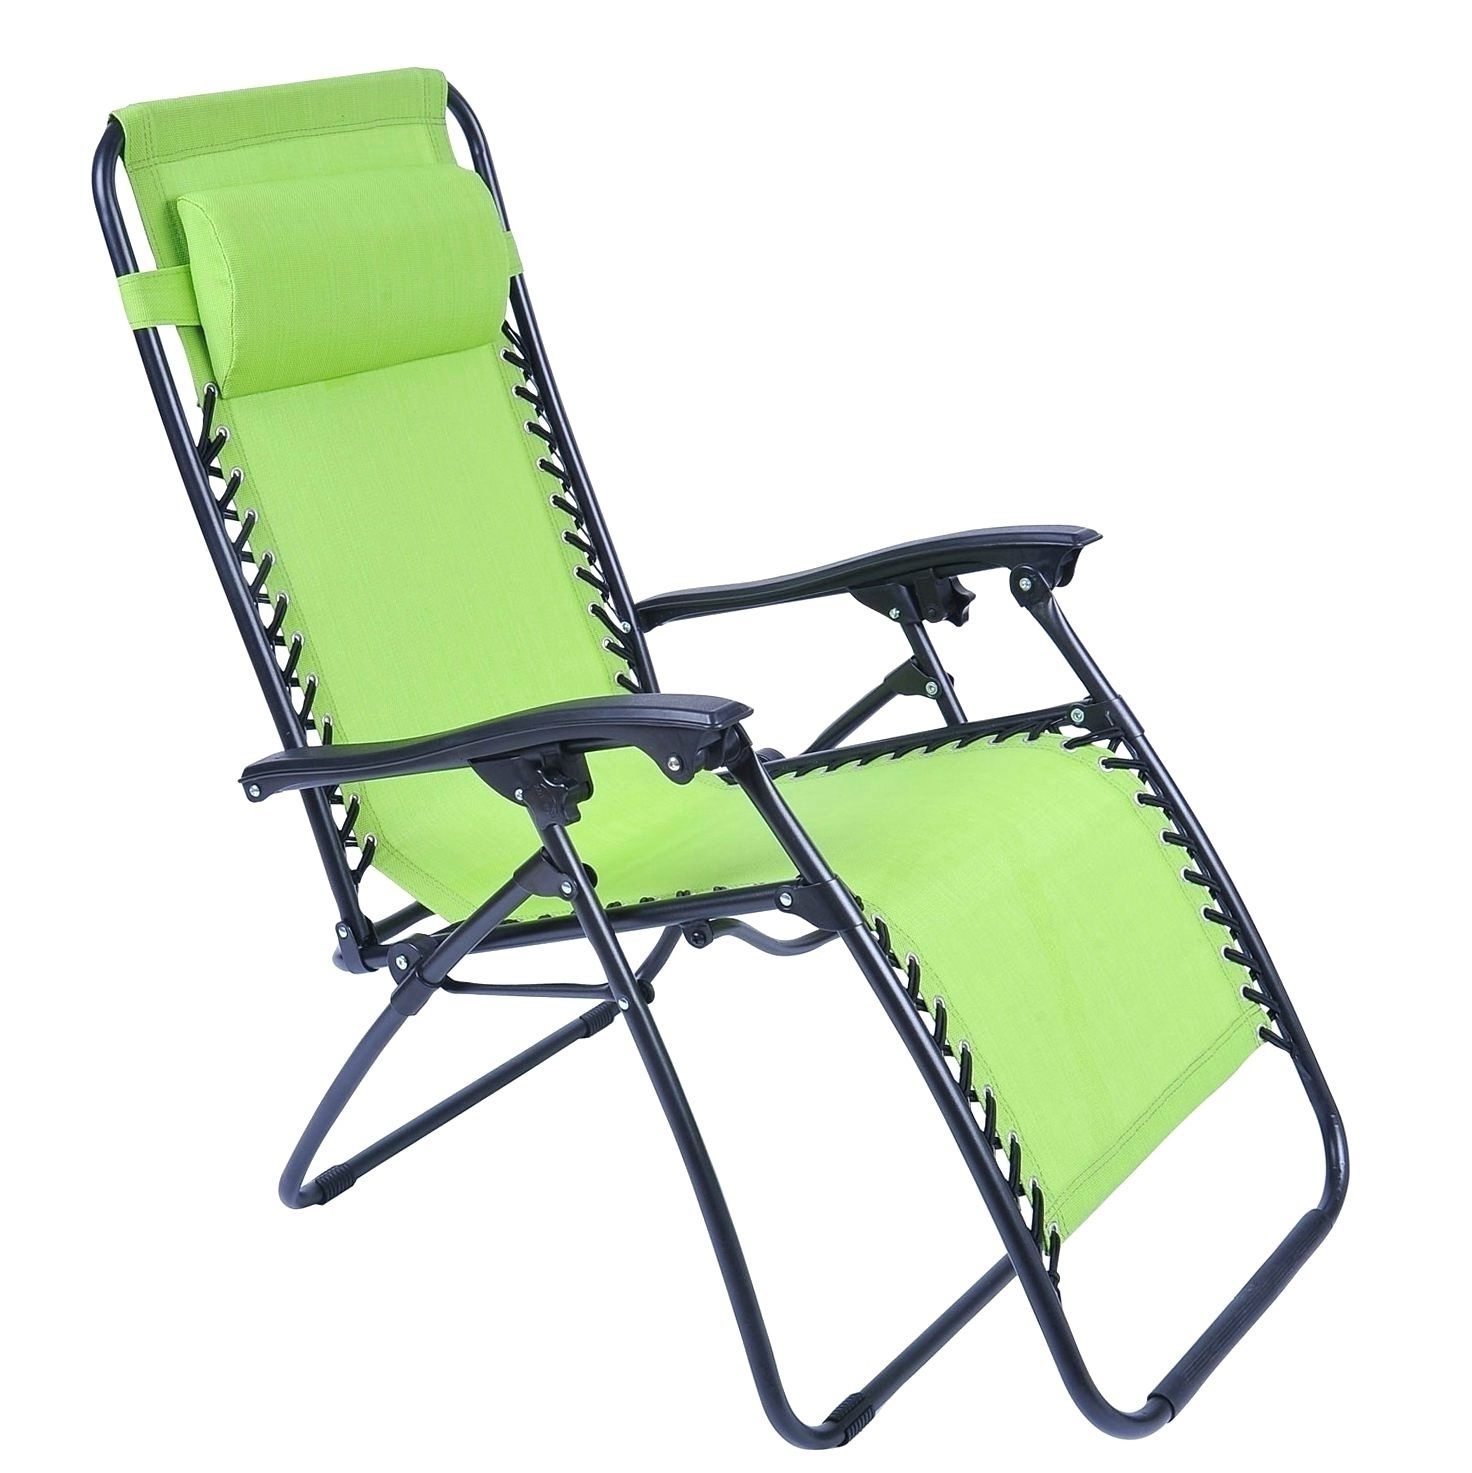 Recent Heavy Duty Outdoor Chaise Lounge Chairs Within Heavy Duty Folding Lounge Chairs • Lounge Chairs Ideas (View 13 of 15)